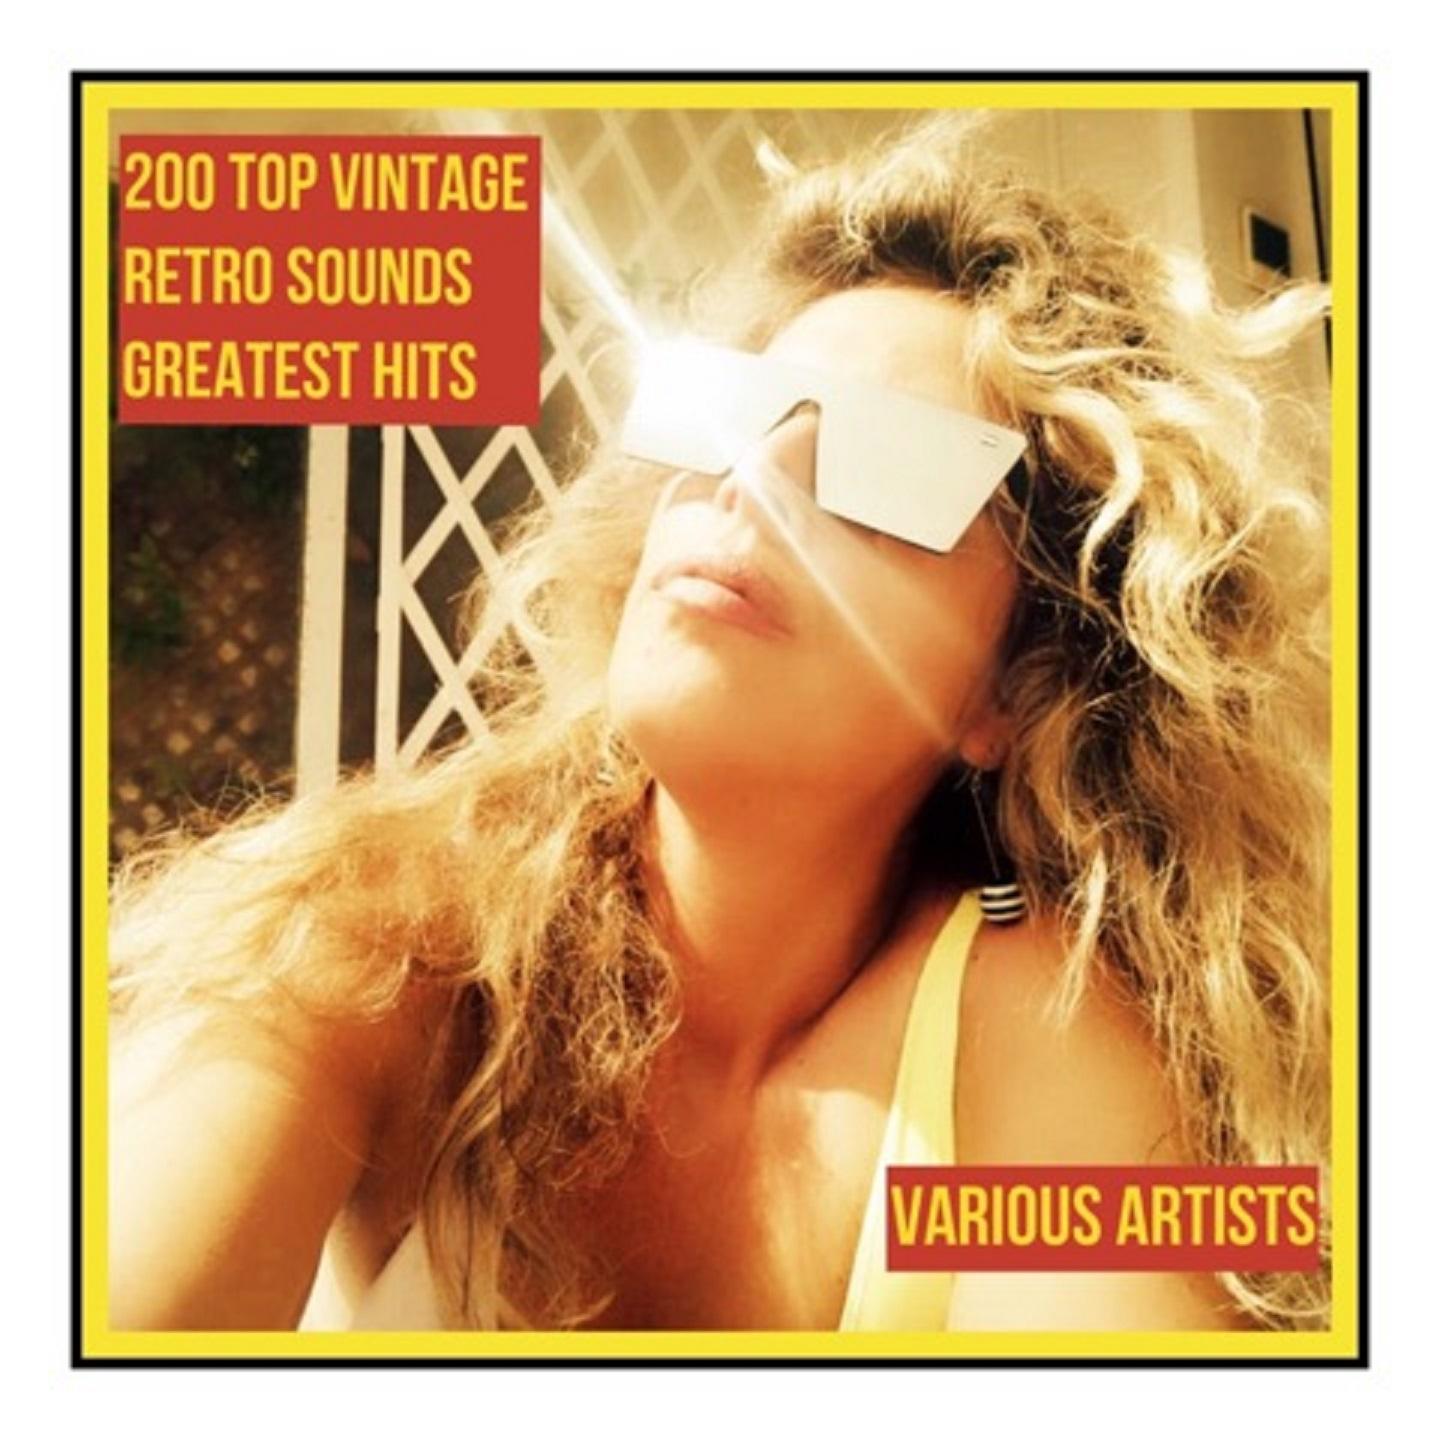 200 Top Vintage Retro Sounds Greatest Hits